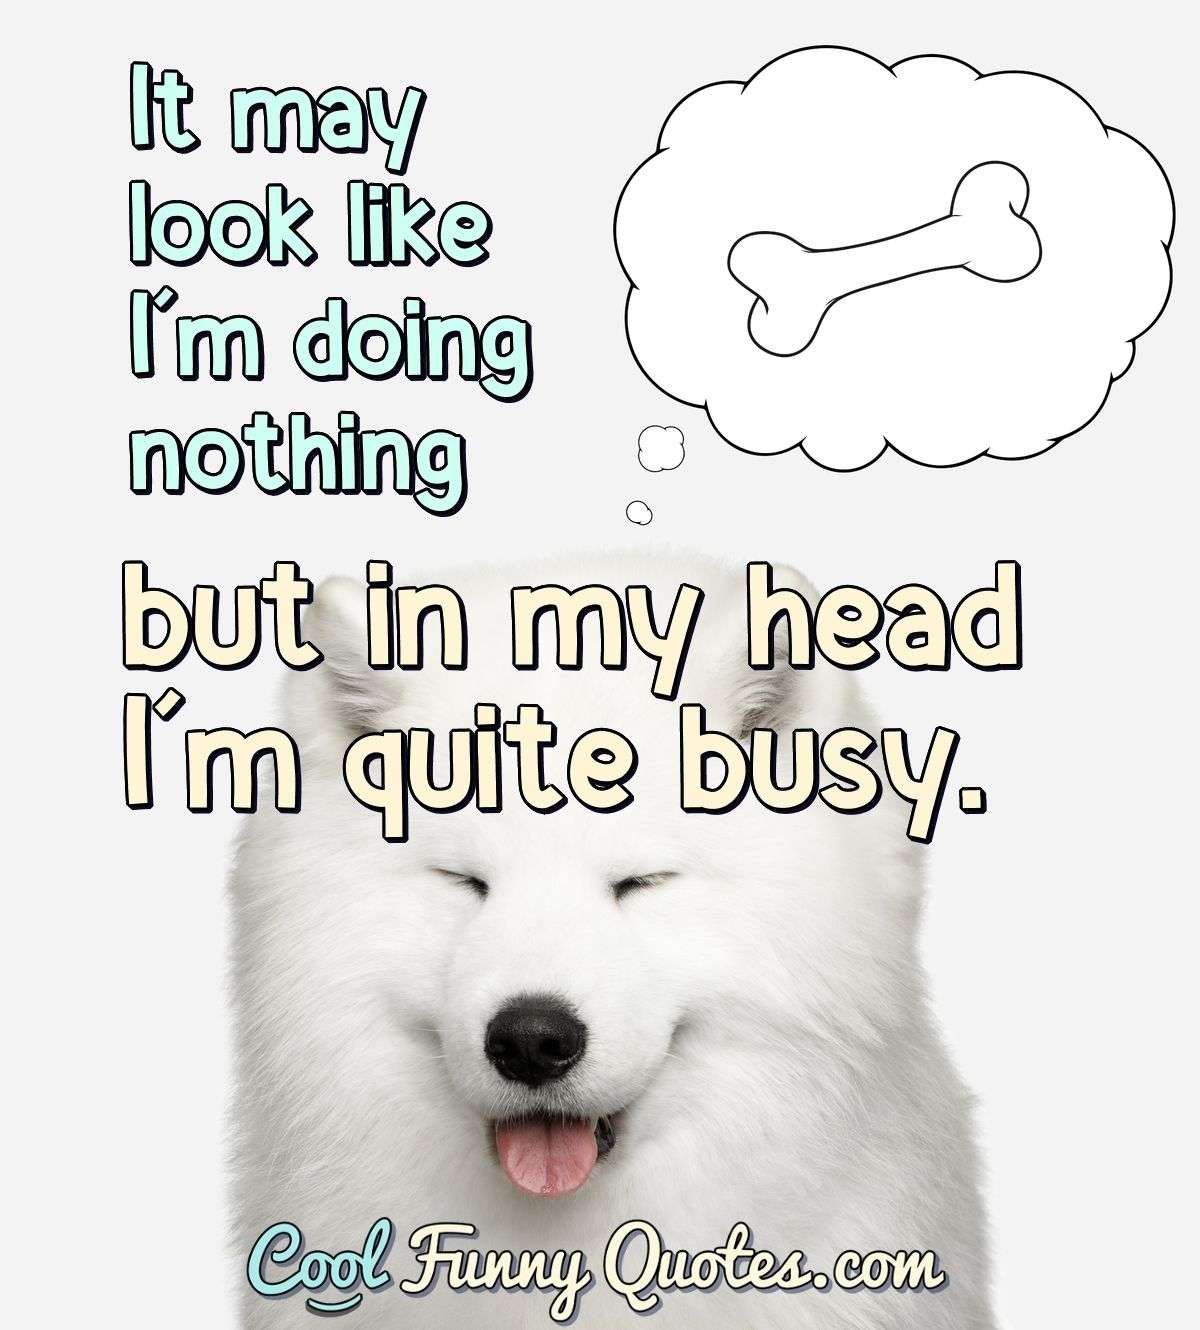 It may look like I'm doing nothing, but in my head I'm quite busy.